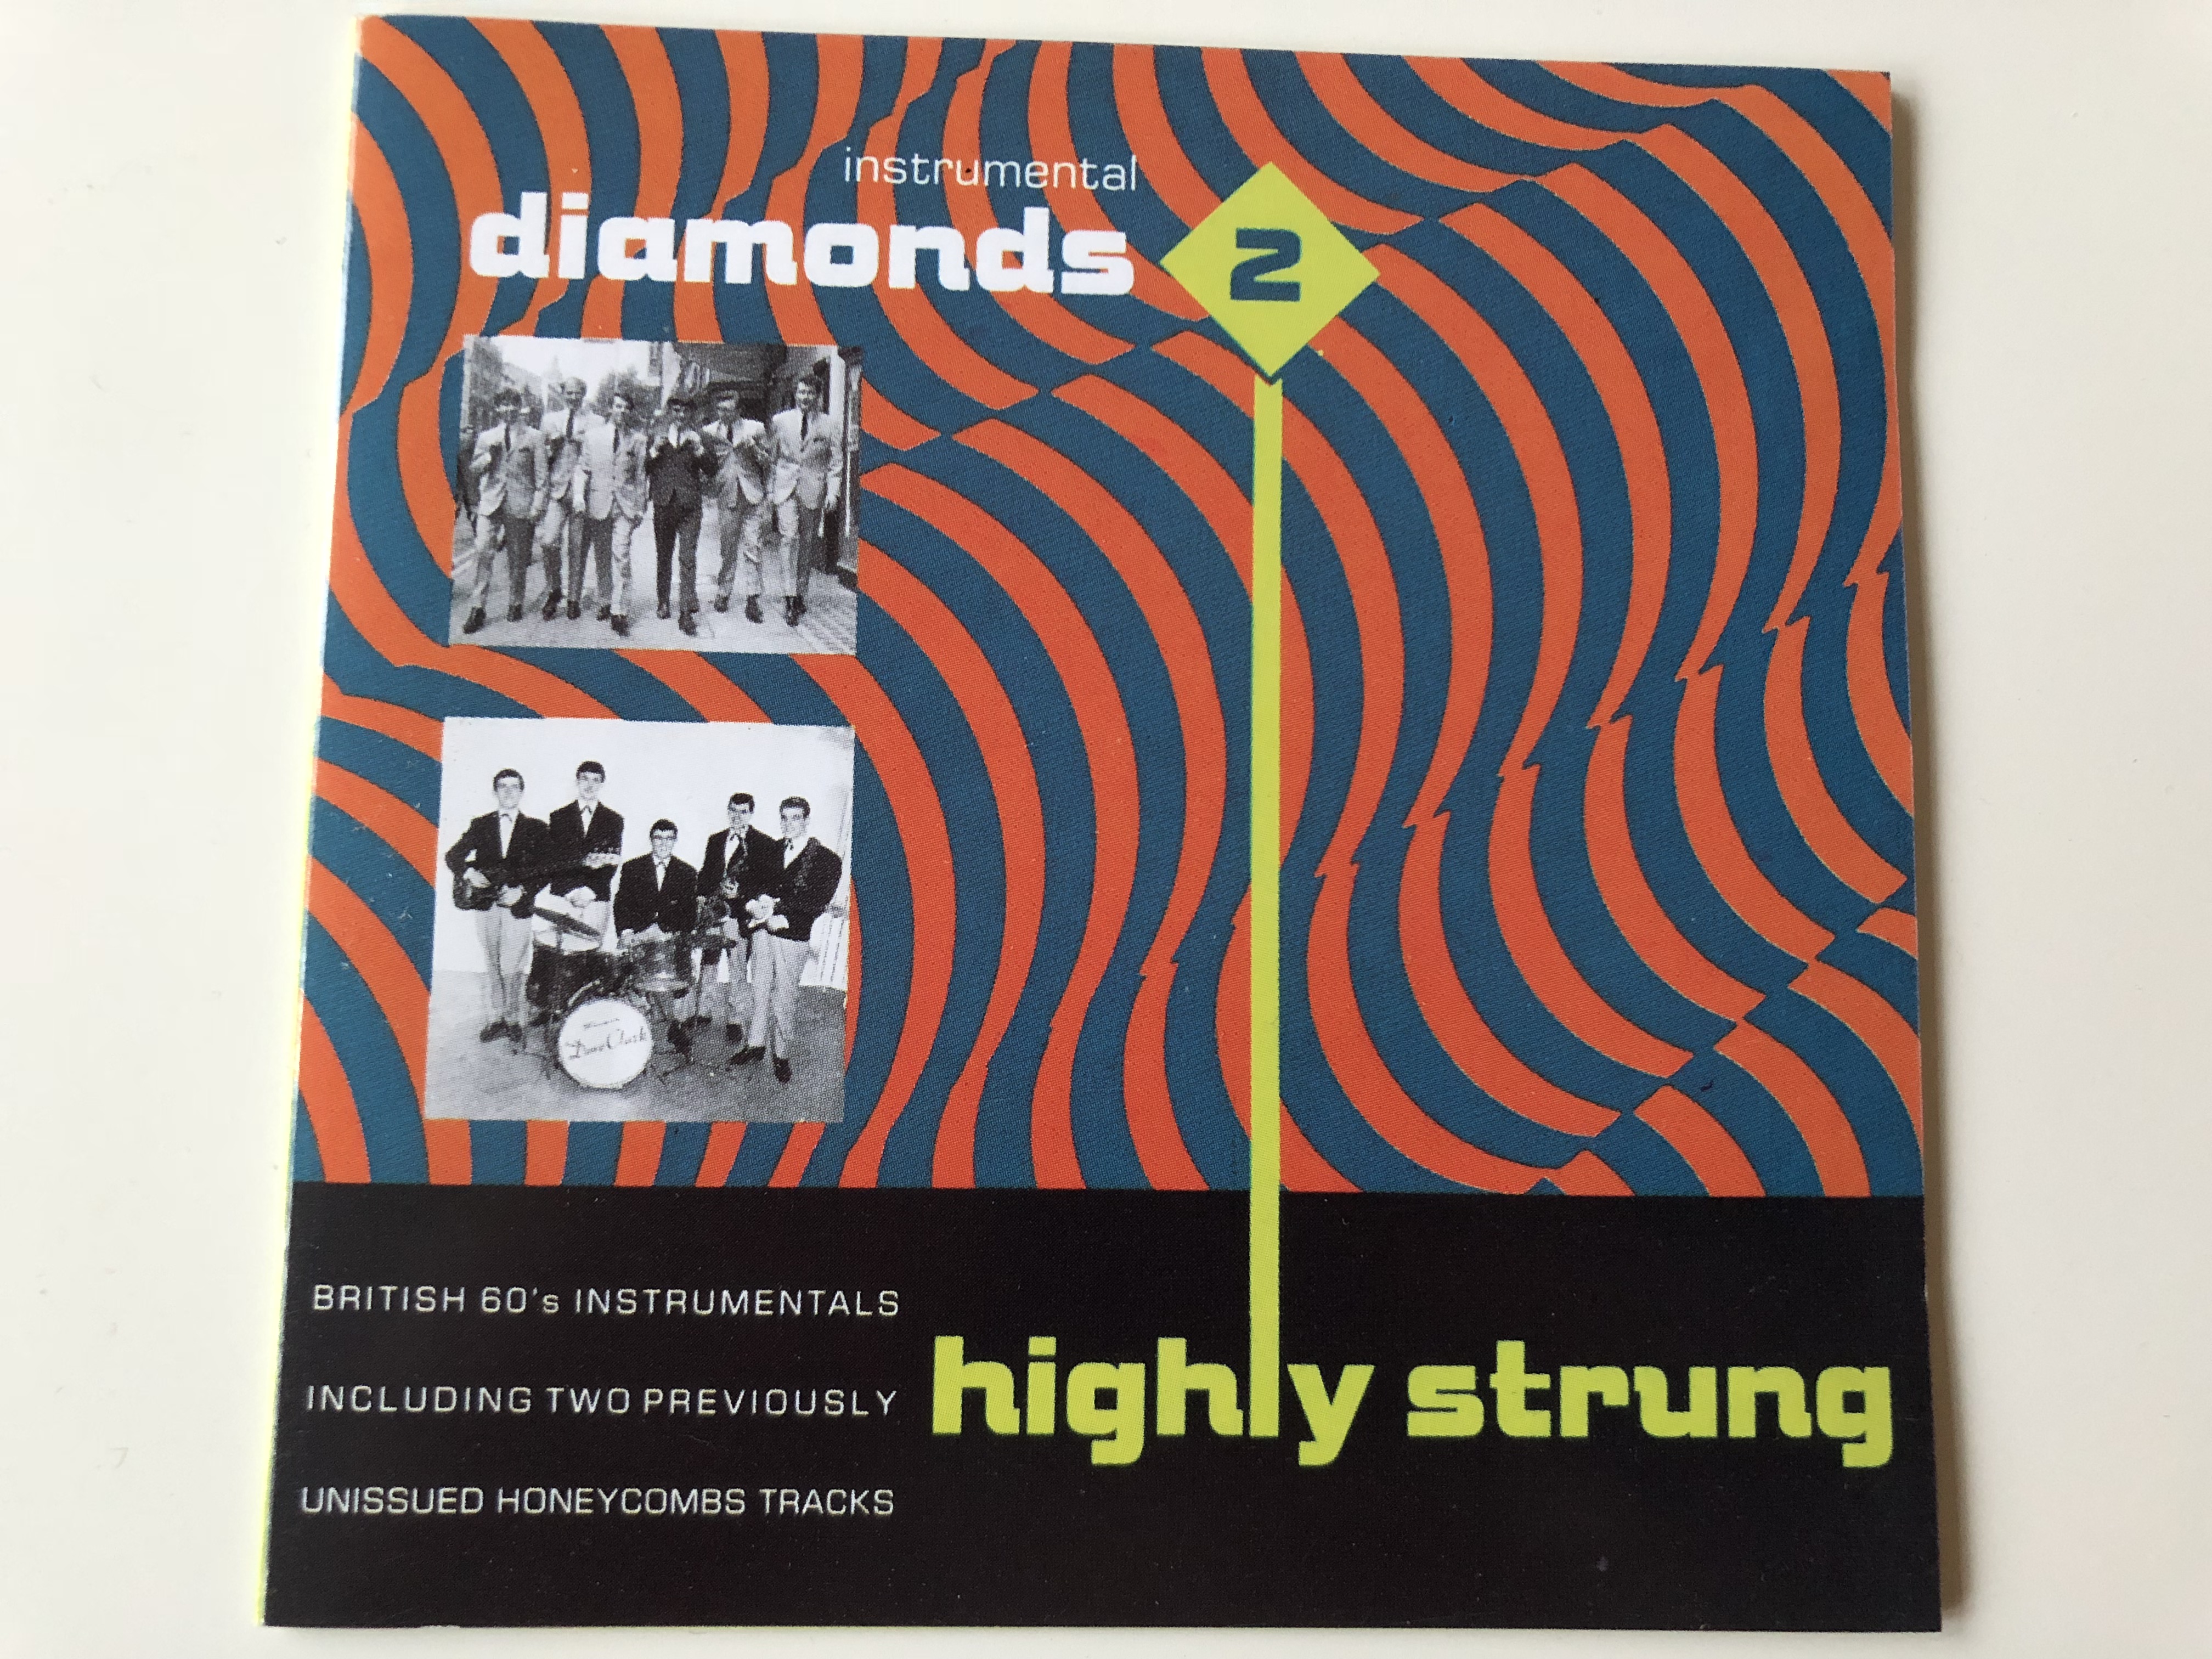 instrumental-diamonds-2-highly-strung-british-60-s-instrumentals-including-two-previously-unissued-honeycomb-tracks-audio-cd-sequel-records-1-.jpg